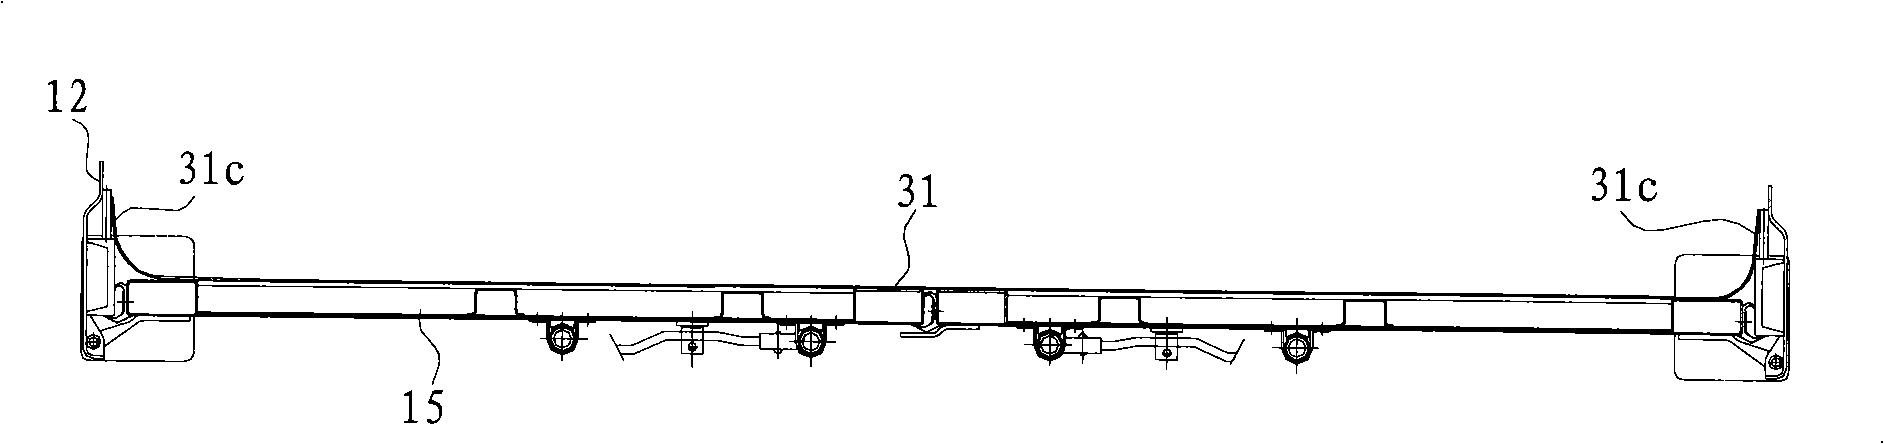 Dry and bulk cargo container and enhanced mechanism for gate end sealing